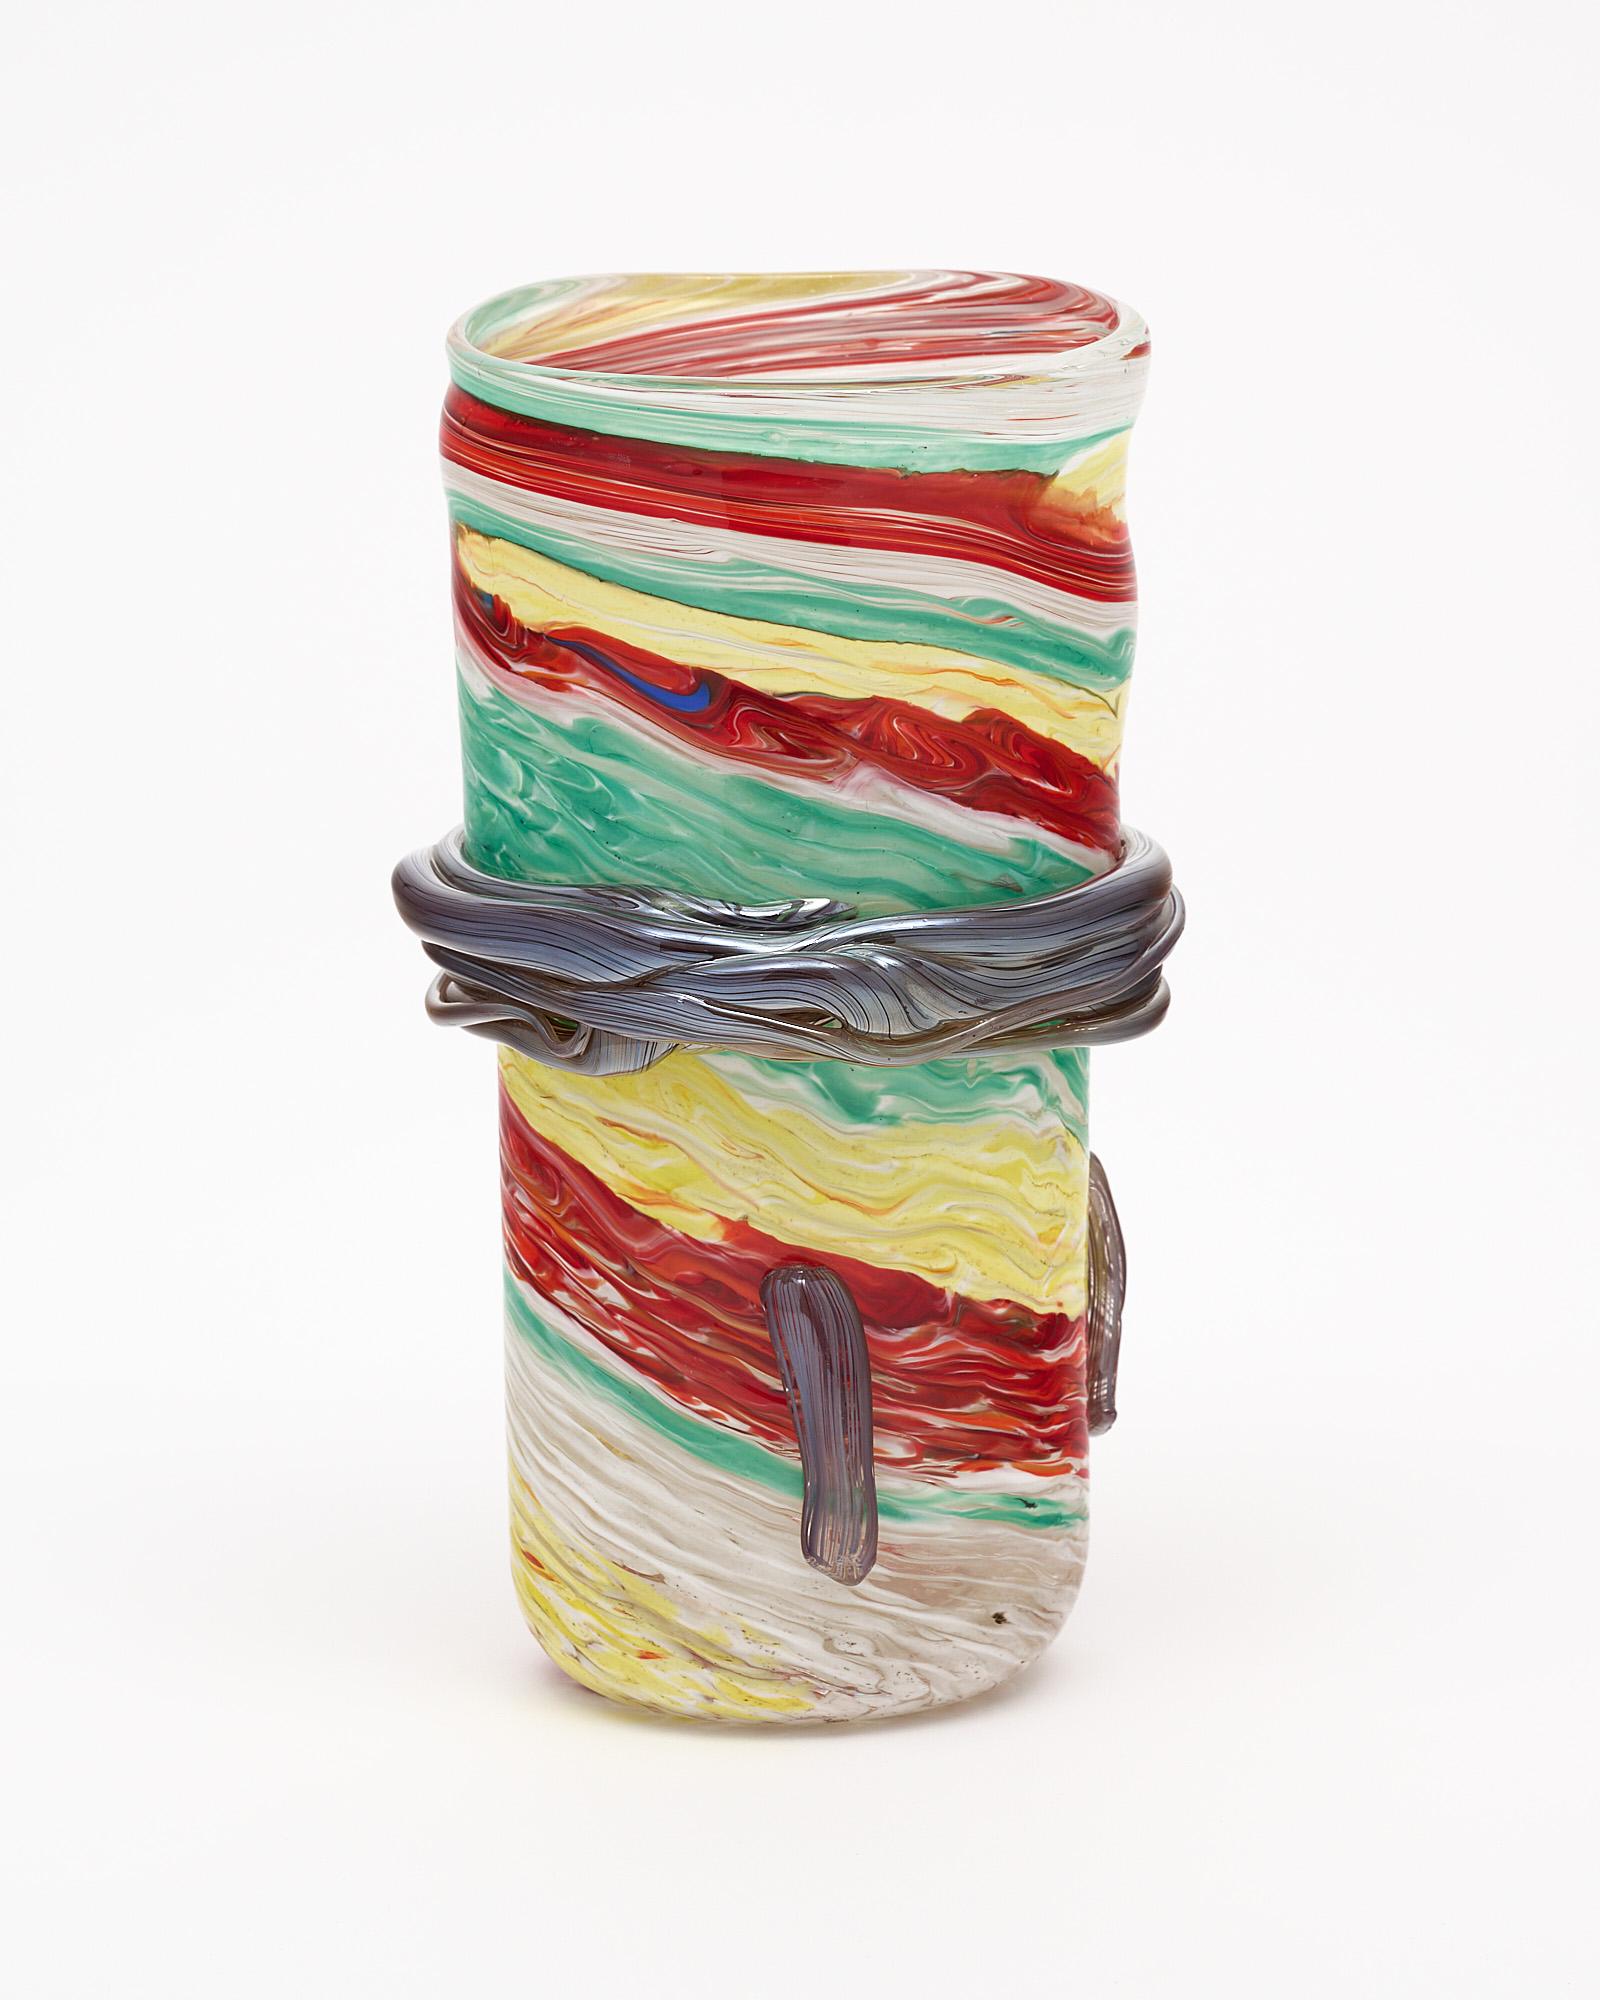 Murano glass vase, Italian, from the Island of Murano. This hand-blown glass piece is made with multicolored glass in red, green, and yellow tones and has an organic movement.